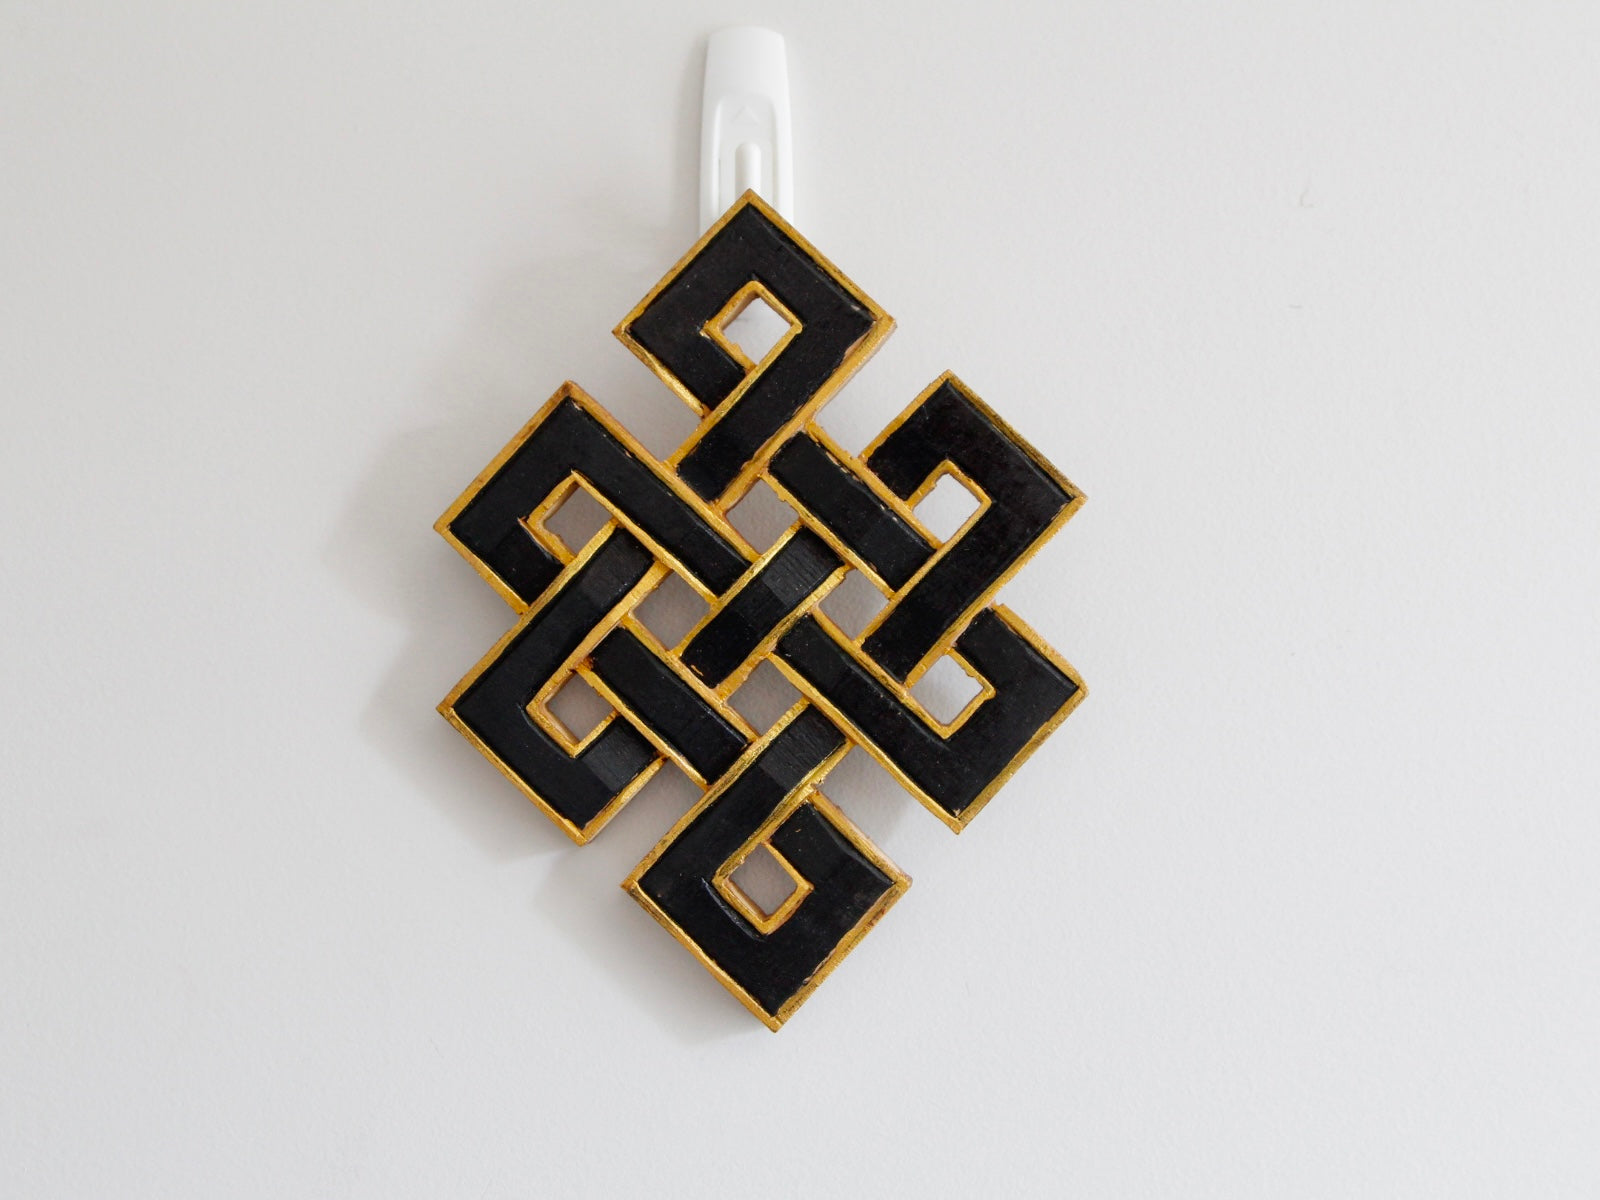 Infinity endless knots hanging up against wall: Black with golden border  